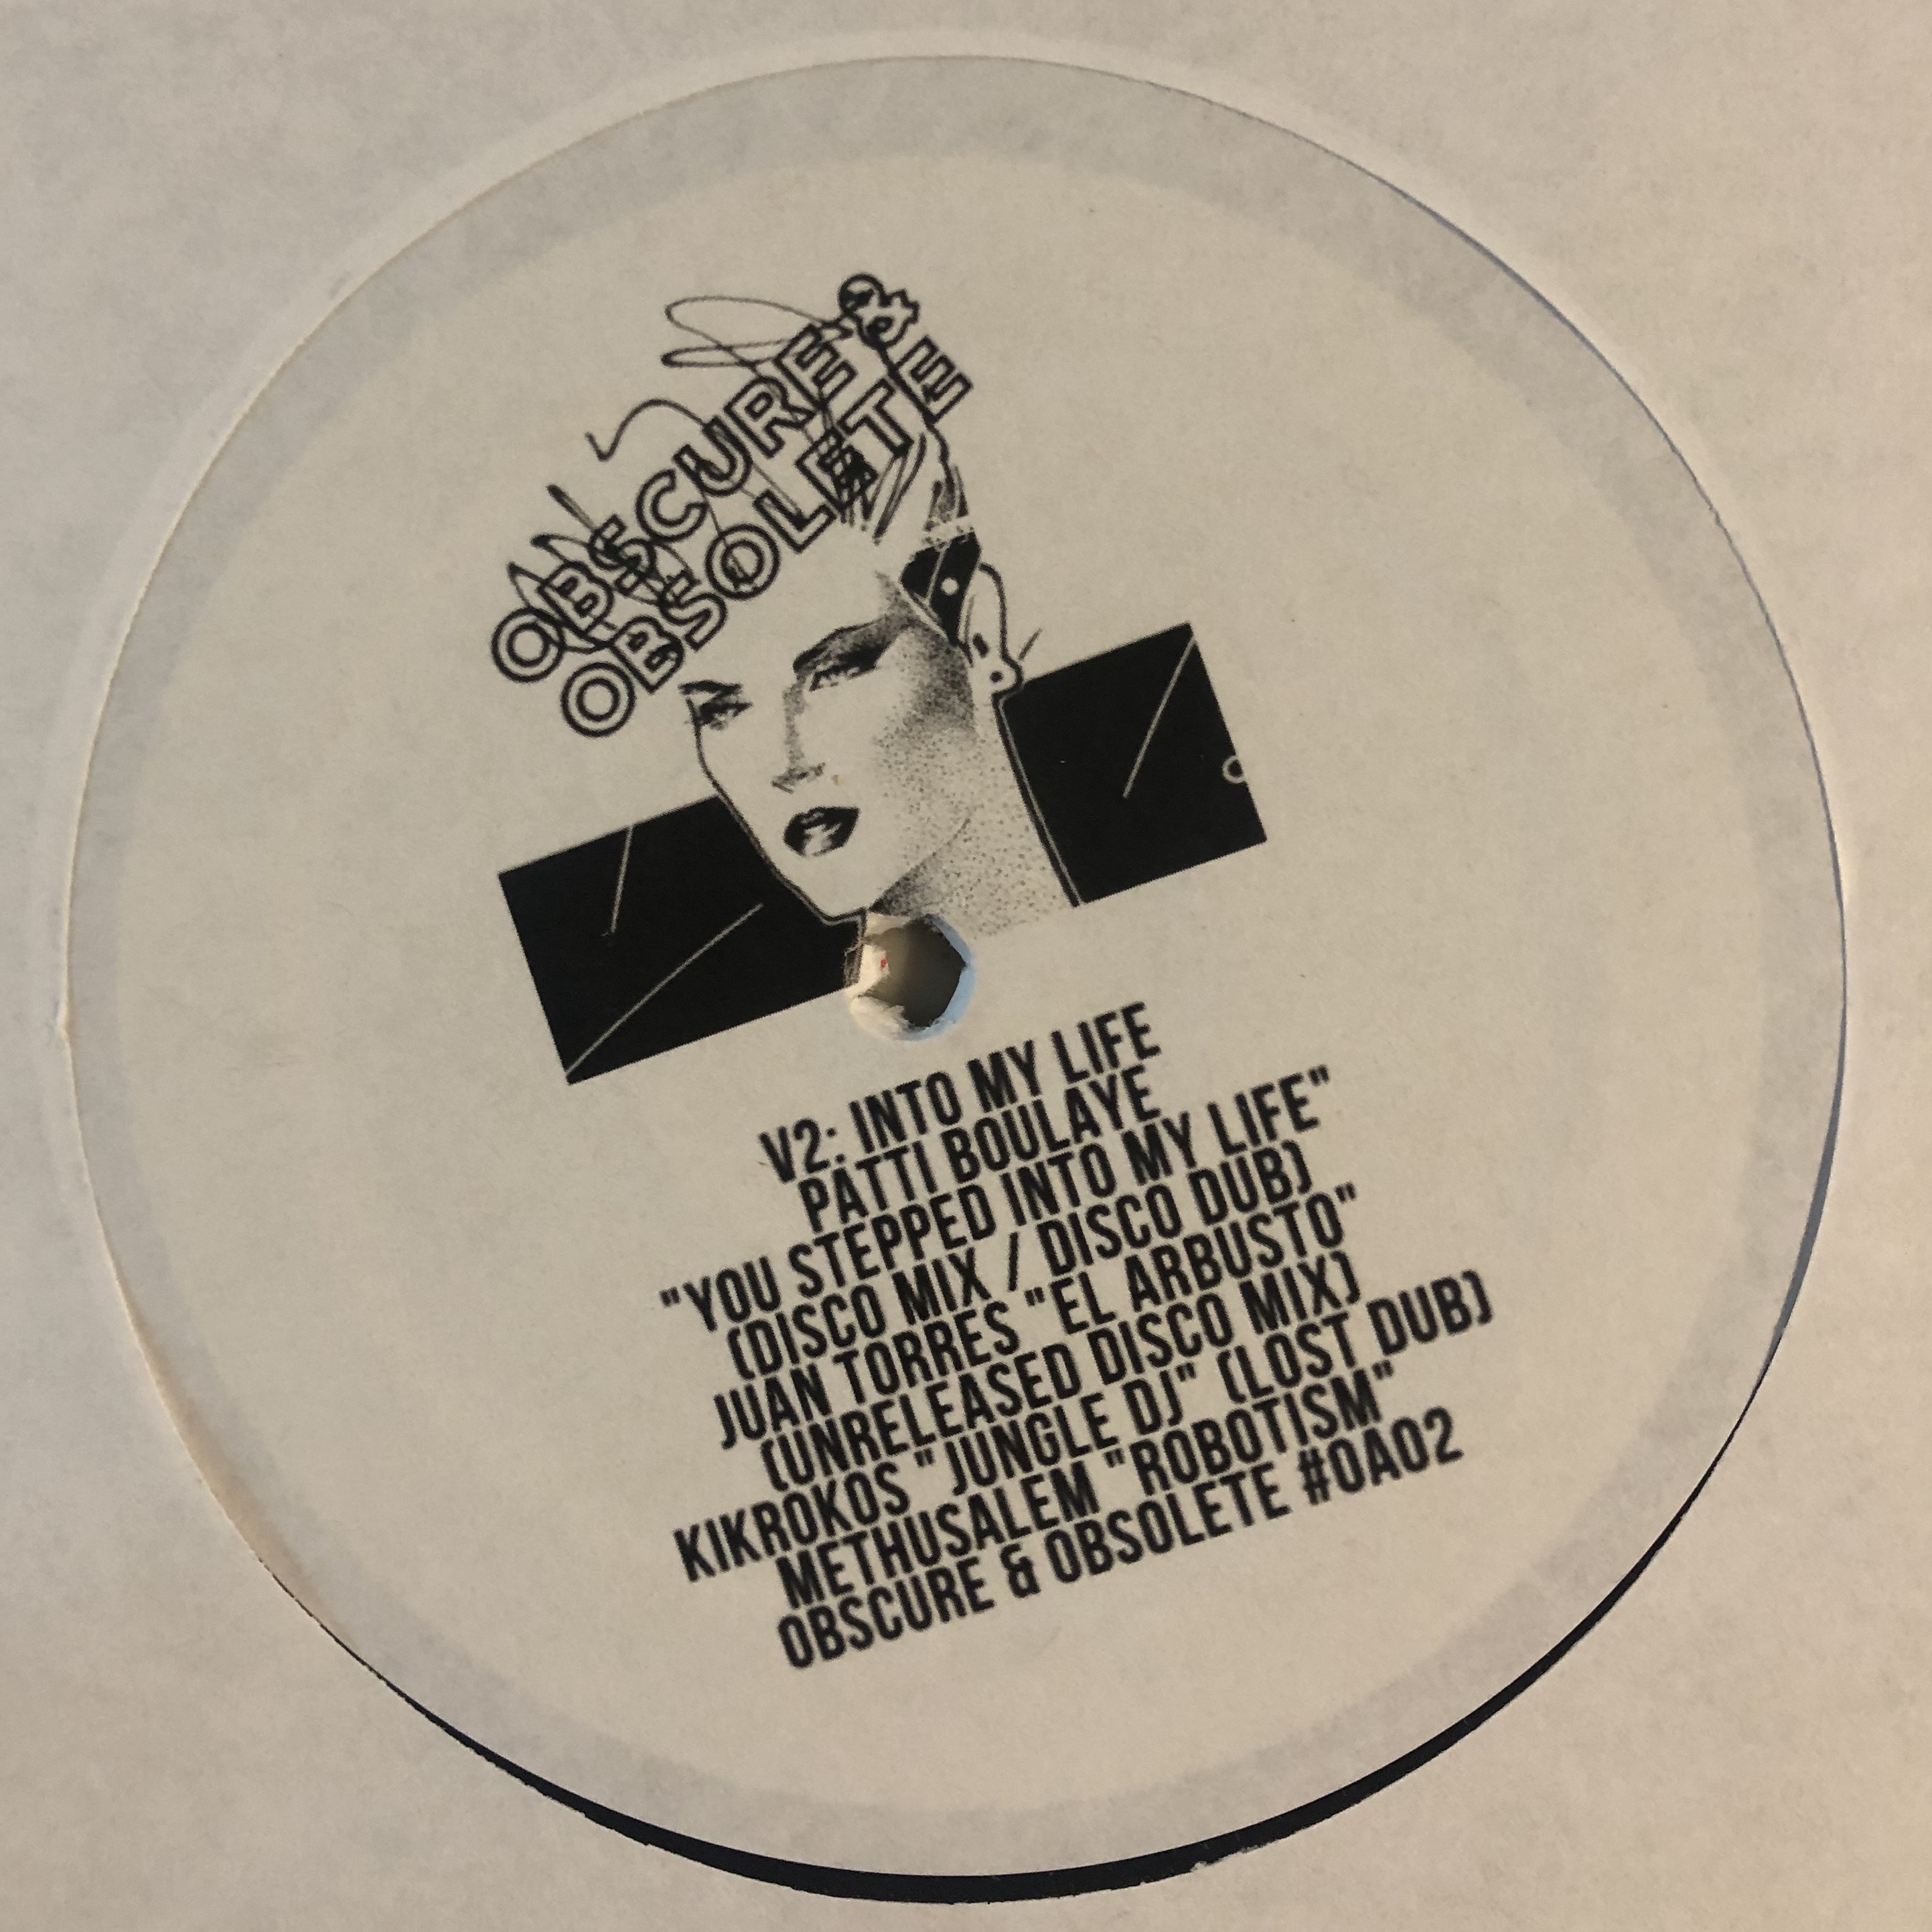 Obscure & Obsolete/V2: INTO MY LIFE 12"